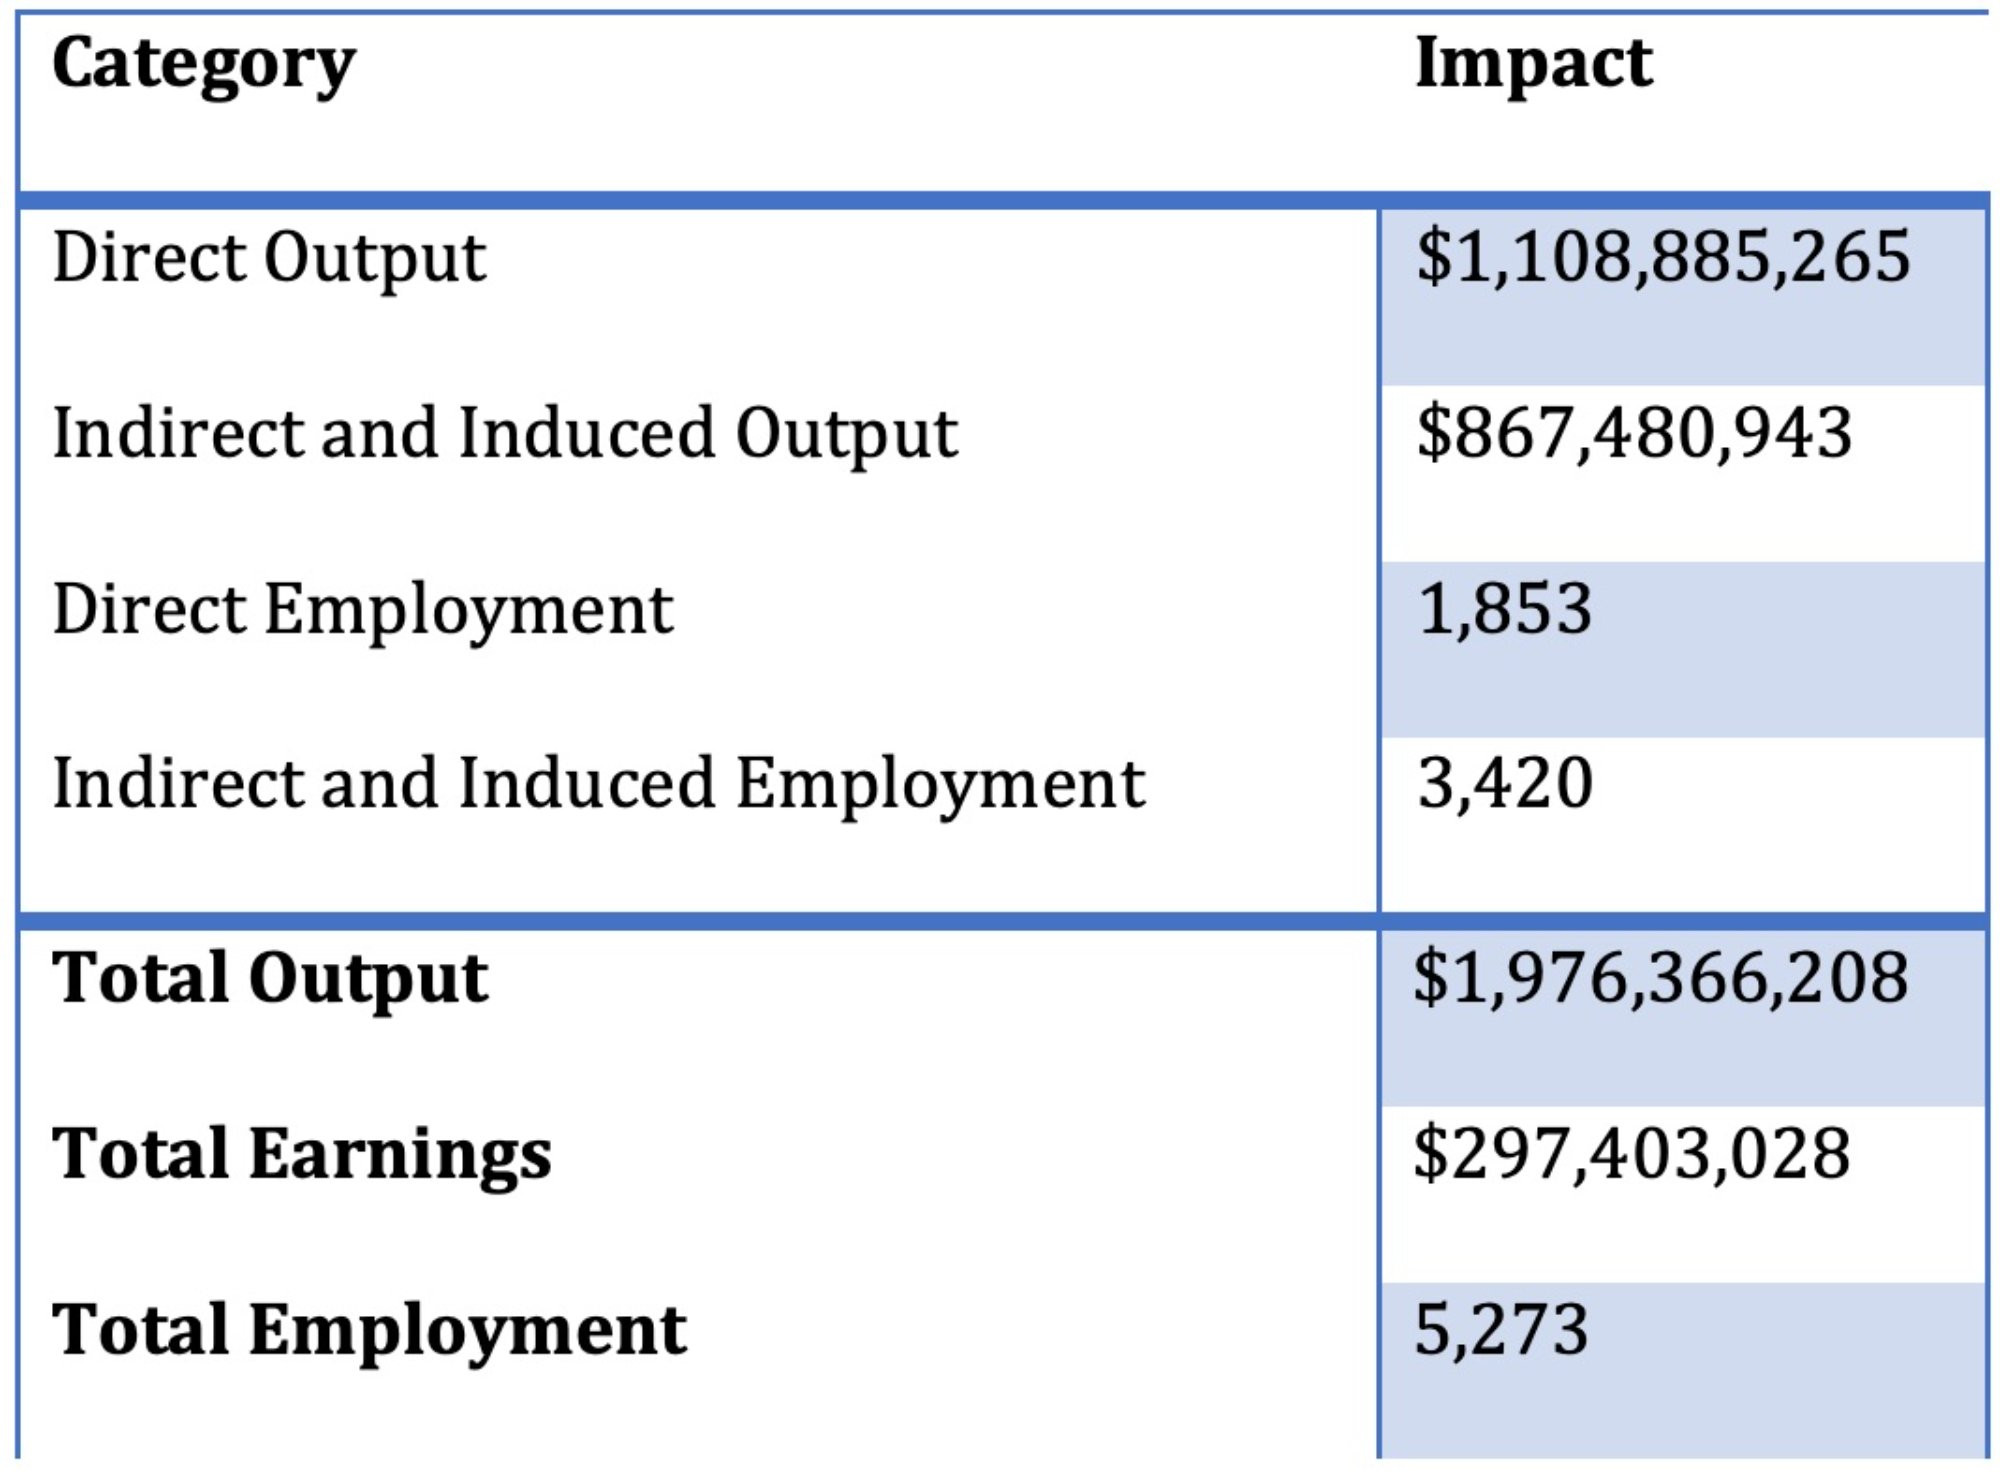 Table of Estimated Impact of Decline in Auto Manufacturing Employment on West Michigan Economy